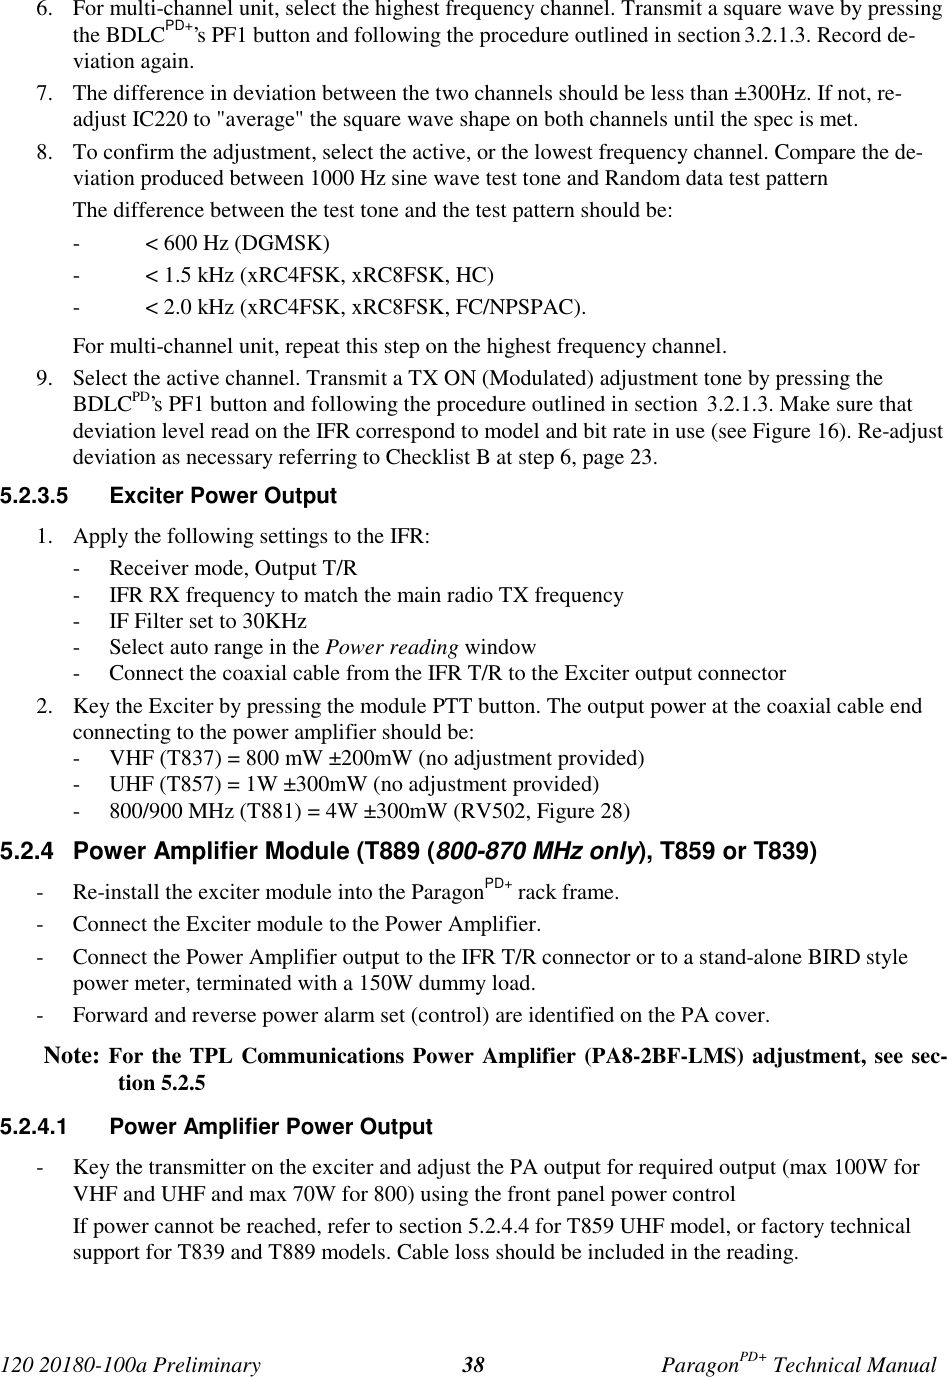 Page 45 of CalAmp Wireless Networks BDD4T881S2 ParagonPD User Manual Parg PD  T100a Prelim